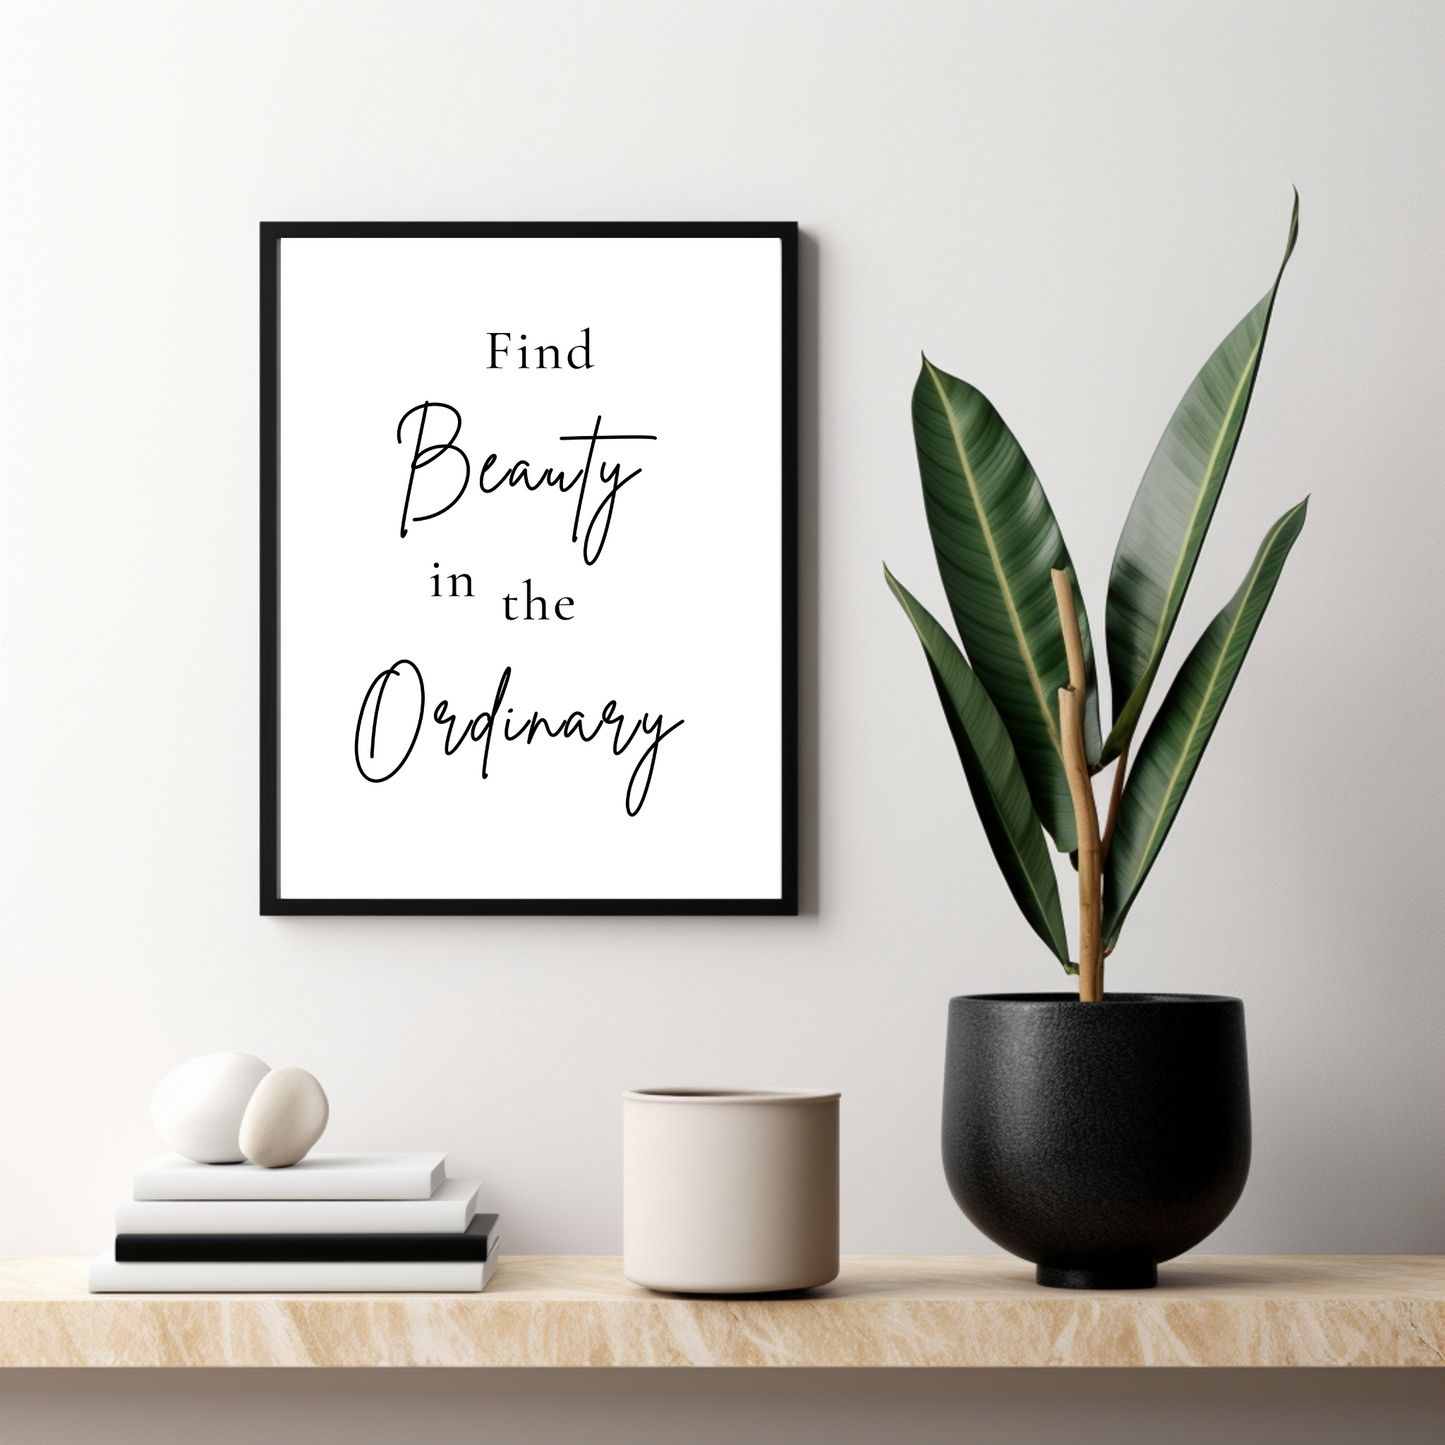 Minimal Quote - Find Beauty in the Ordinary